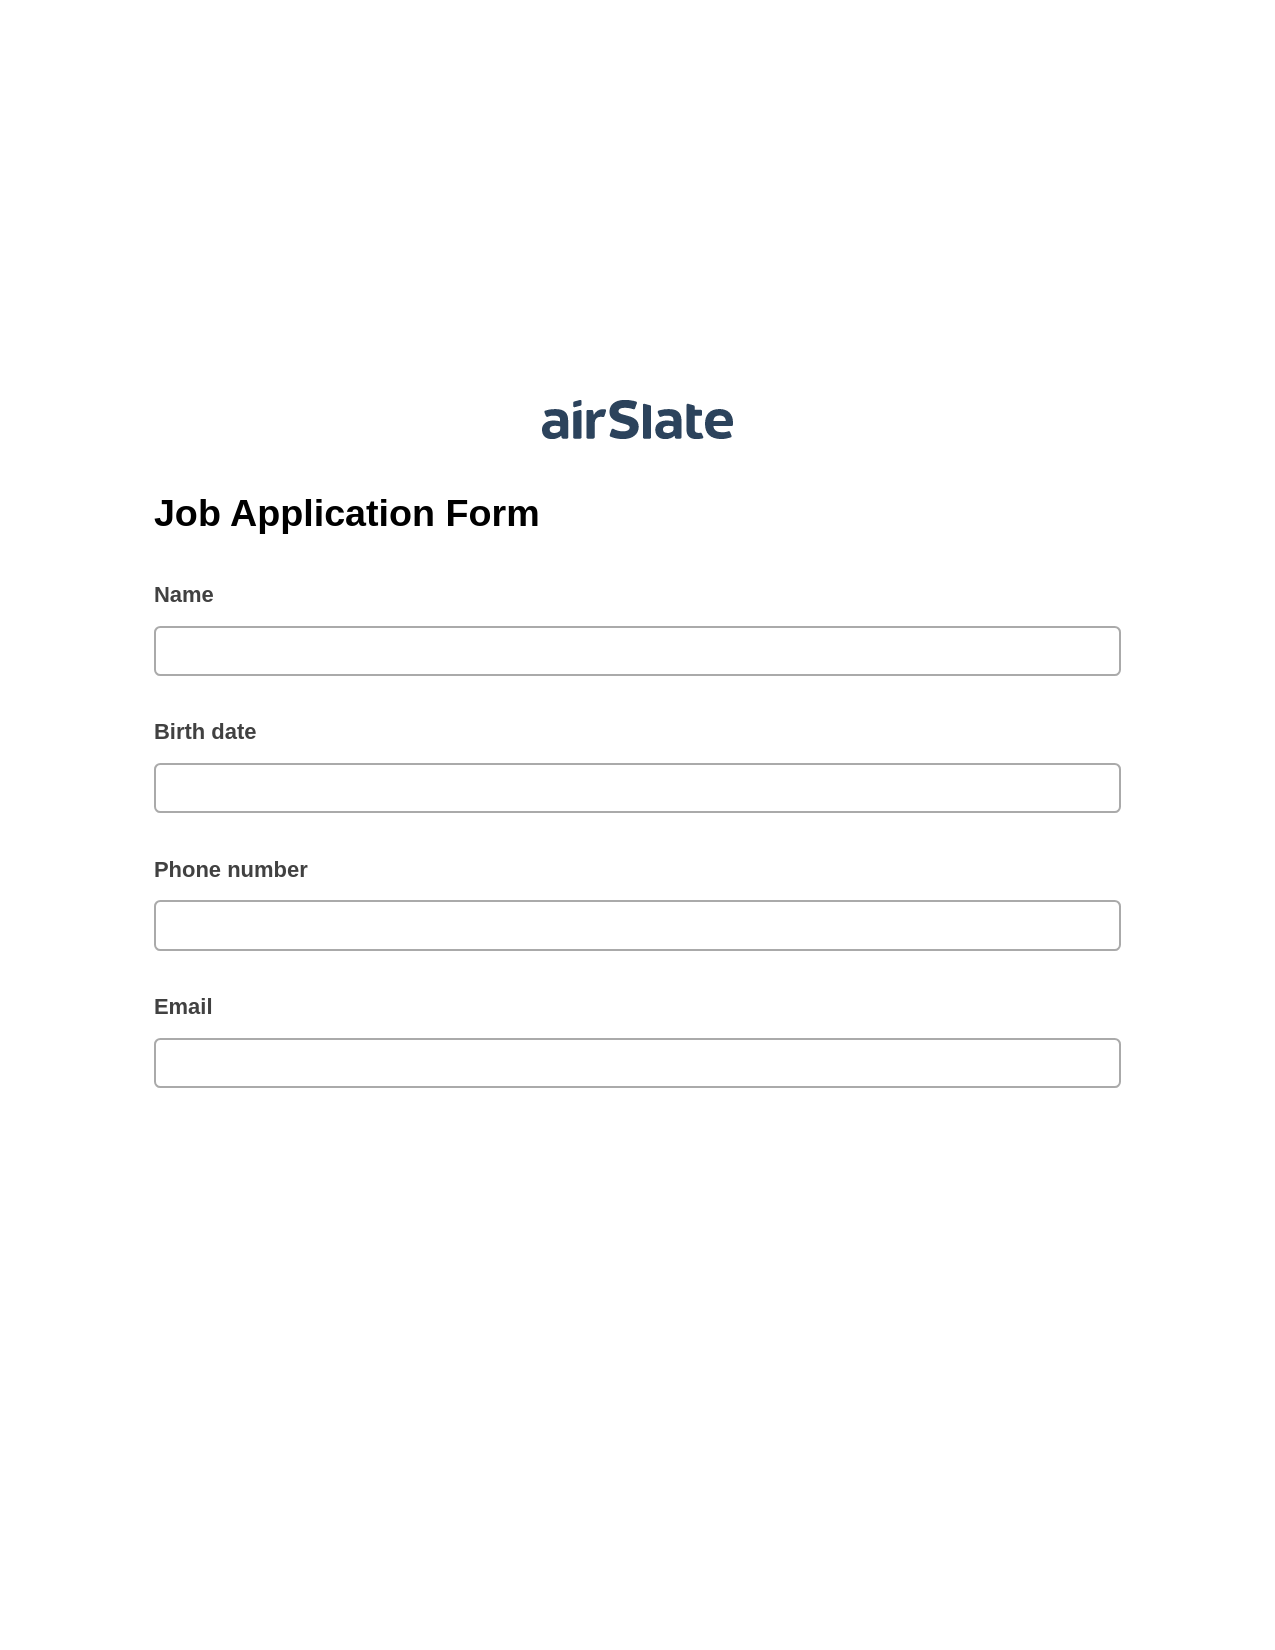 Job Application Form Pre-fill from Excel Spreadsheet Dropdown Options Bot, Text Message Notification Bot, Export to Formstack Documents Bot